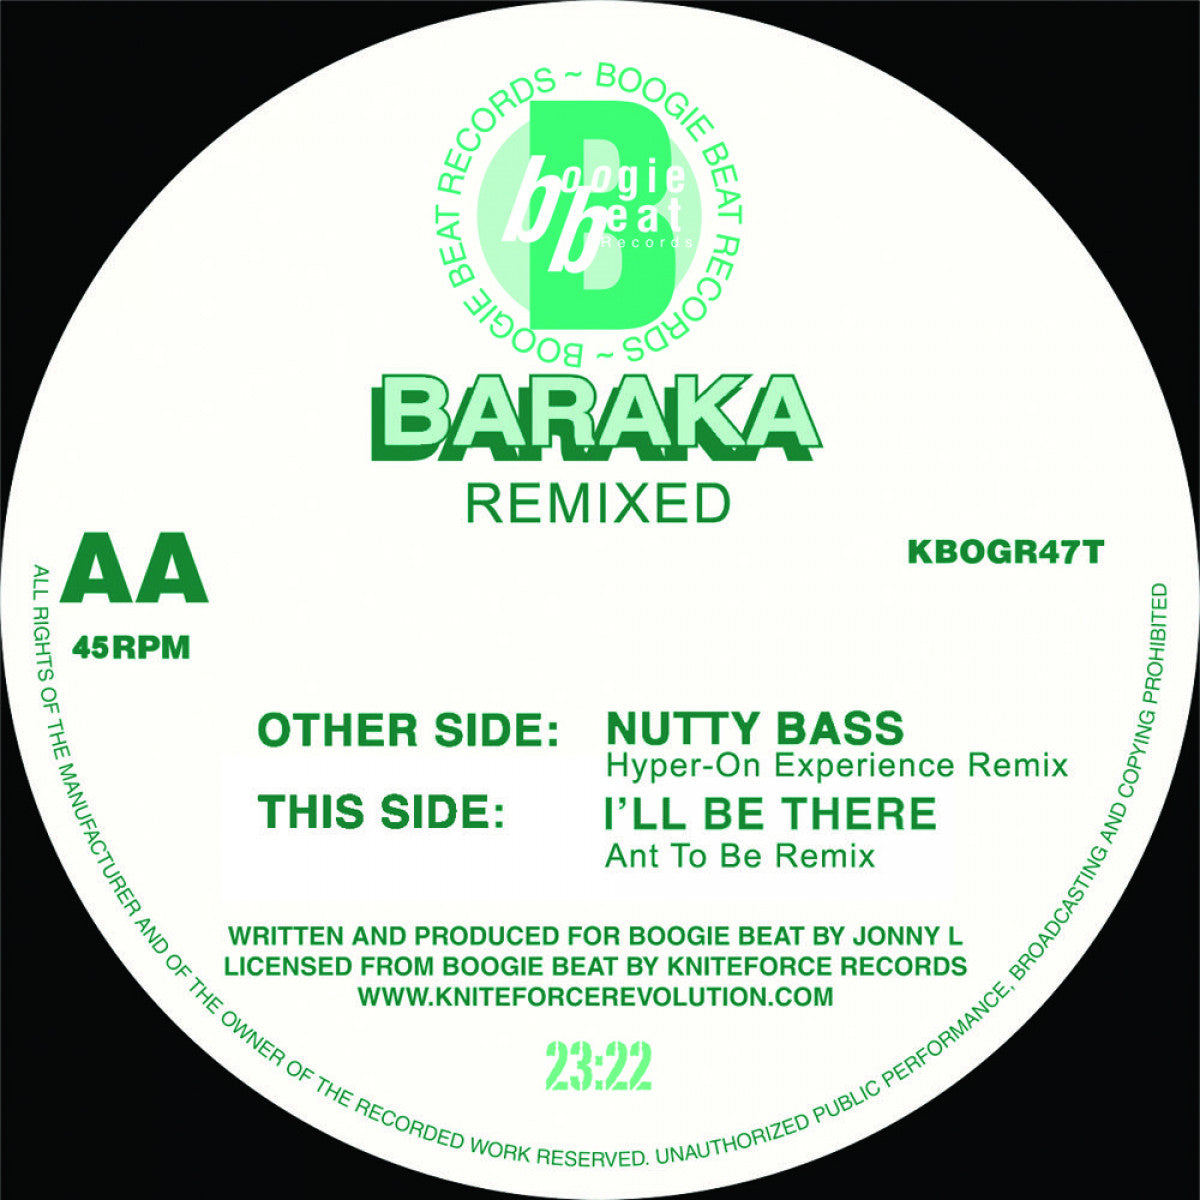 Baraka - Nutty Bass / I’ll Be There Remixes EP